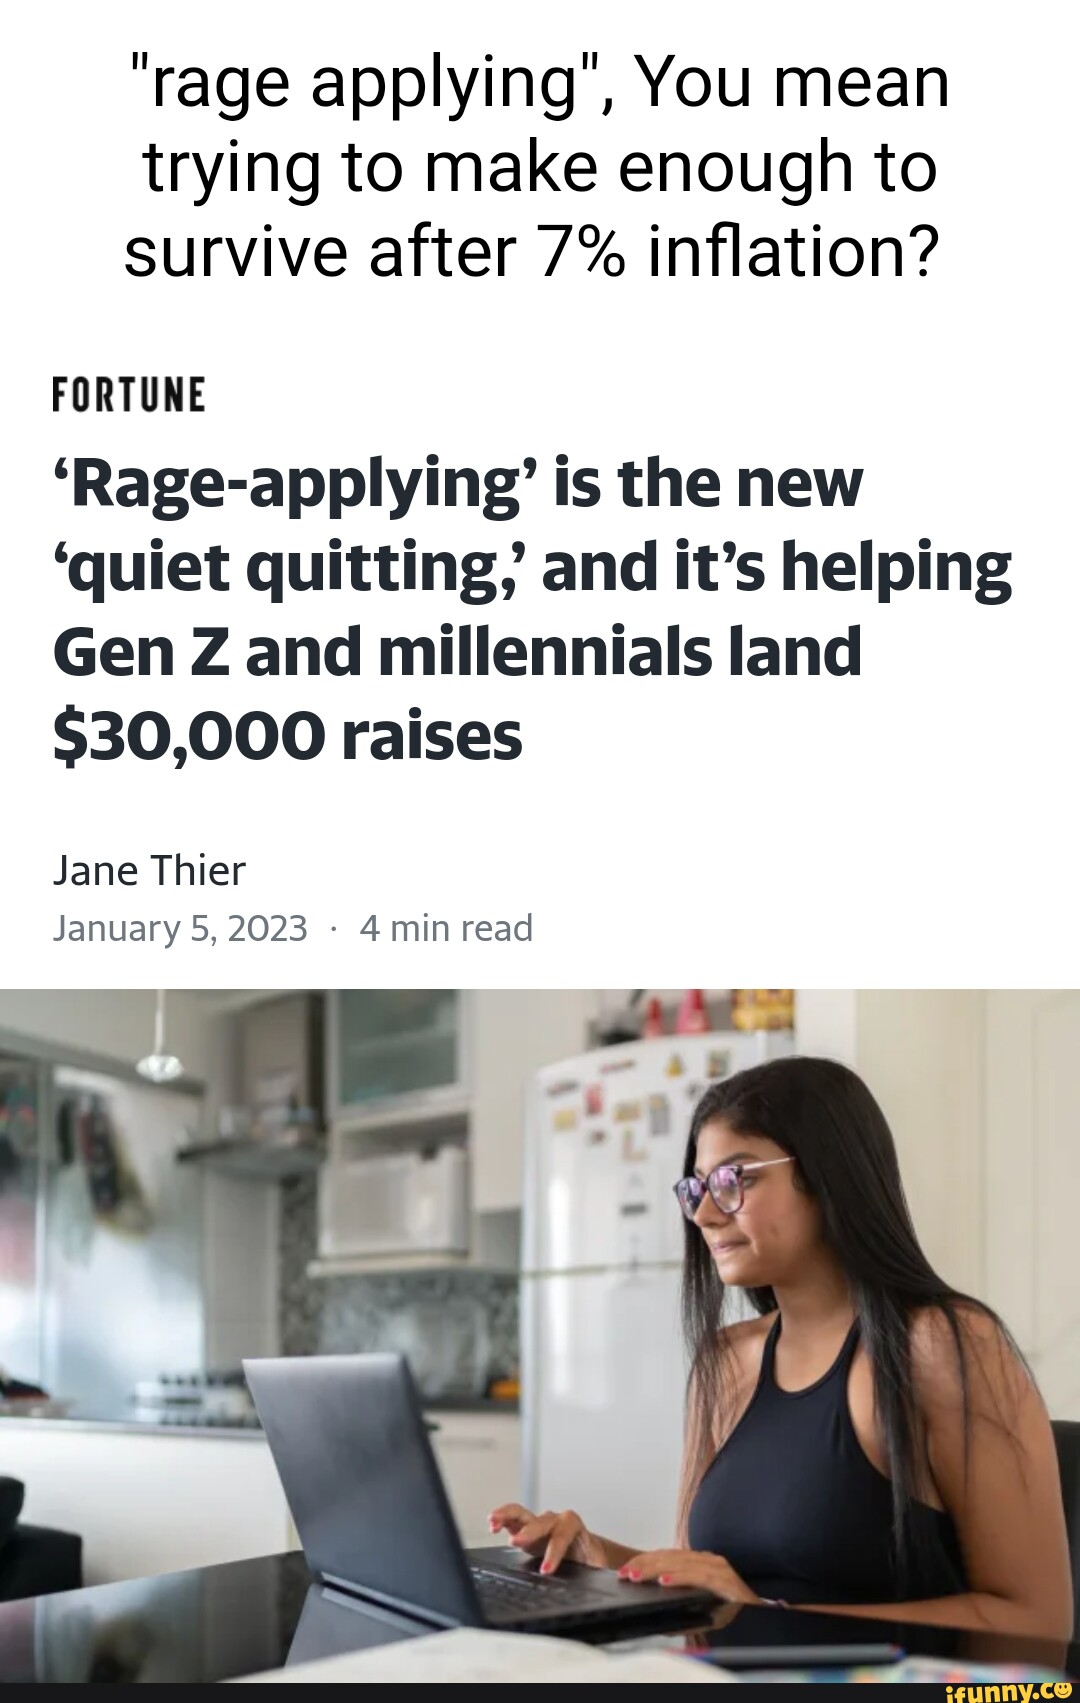 Rage-applying' is the new 'quiet quitting,' and it's helping Gen Z